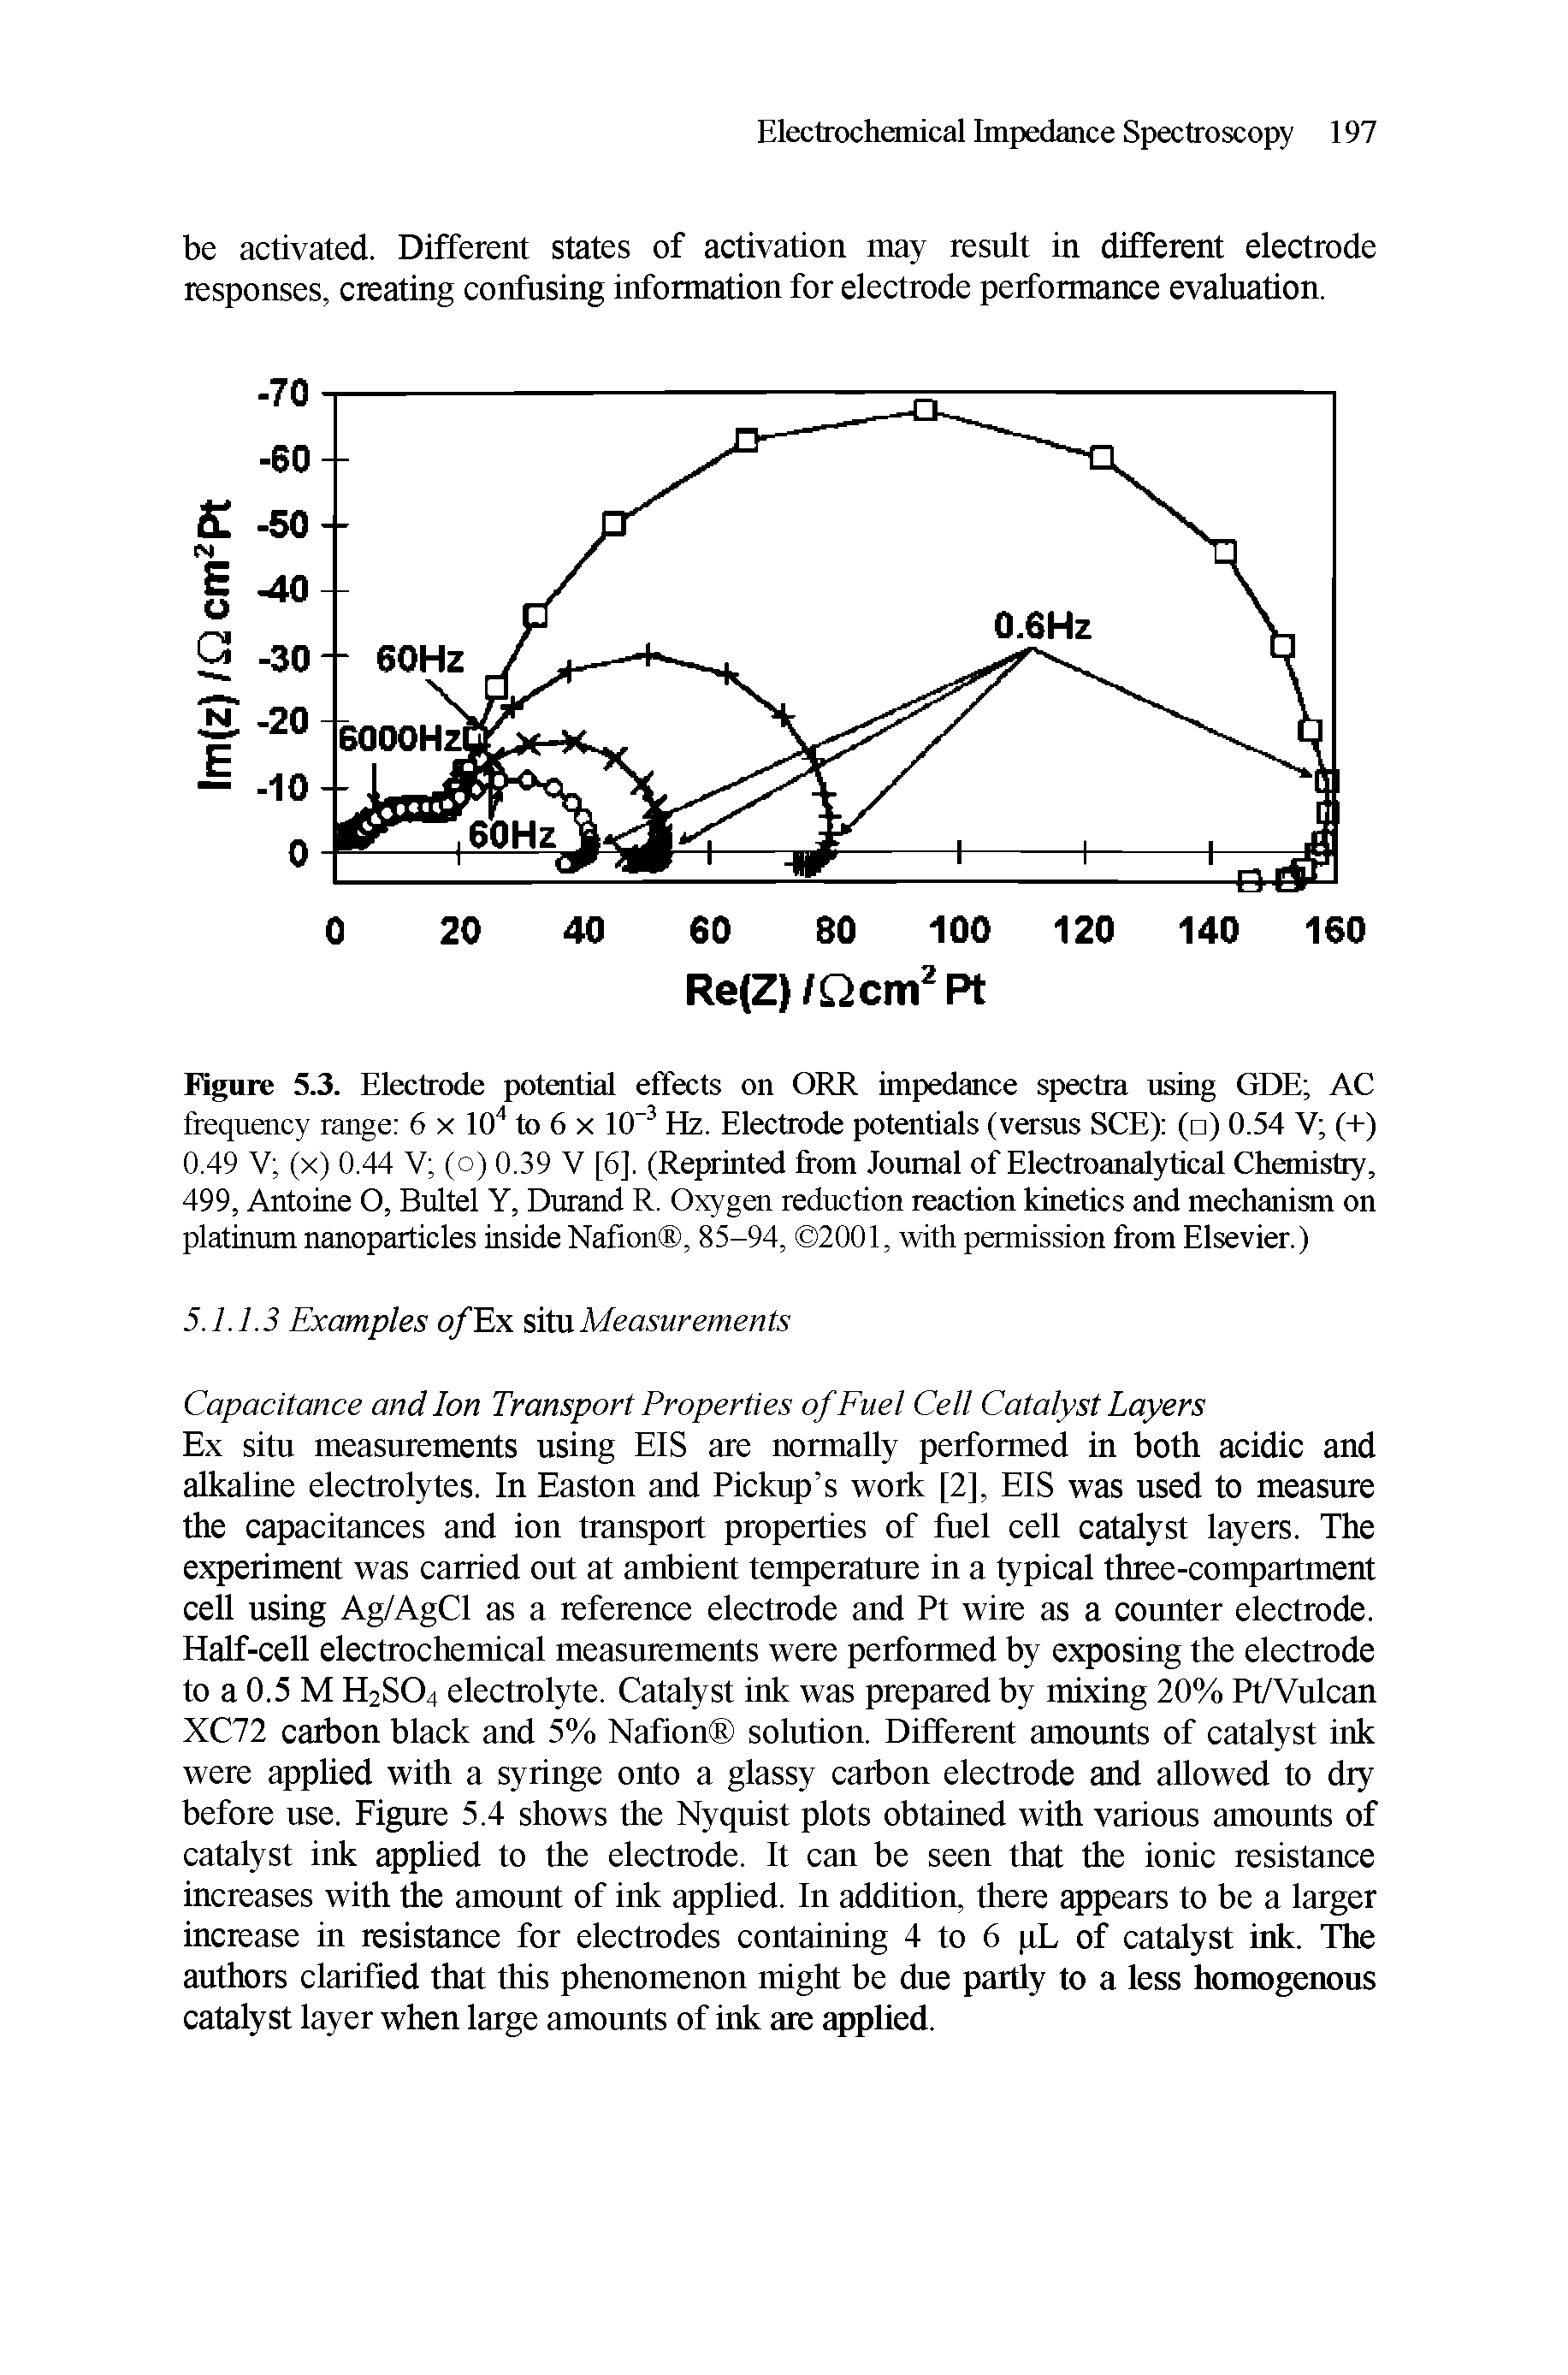 Figure 5.3. Electrode potential effects on ORR impedance spectra using GDE AC frequency range 6 x 104 to 6 x 10 3 Hz. Electrode potentials (versus SCE) ( ) 0.54 V (+) 0.49 V (x) 0.44 V (o) 0.39 V [6], (Reprinted from Journal of Electroanalytical Chemistry, 499, Antoine O, Bultel Y, Durand R. Oxygen reduction reaction kinetics and mechanism on platinum nanoparticles inside Nafion , 85-94, 2001, with permission from Elsevier.)...